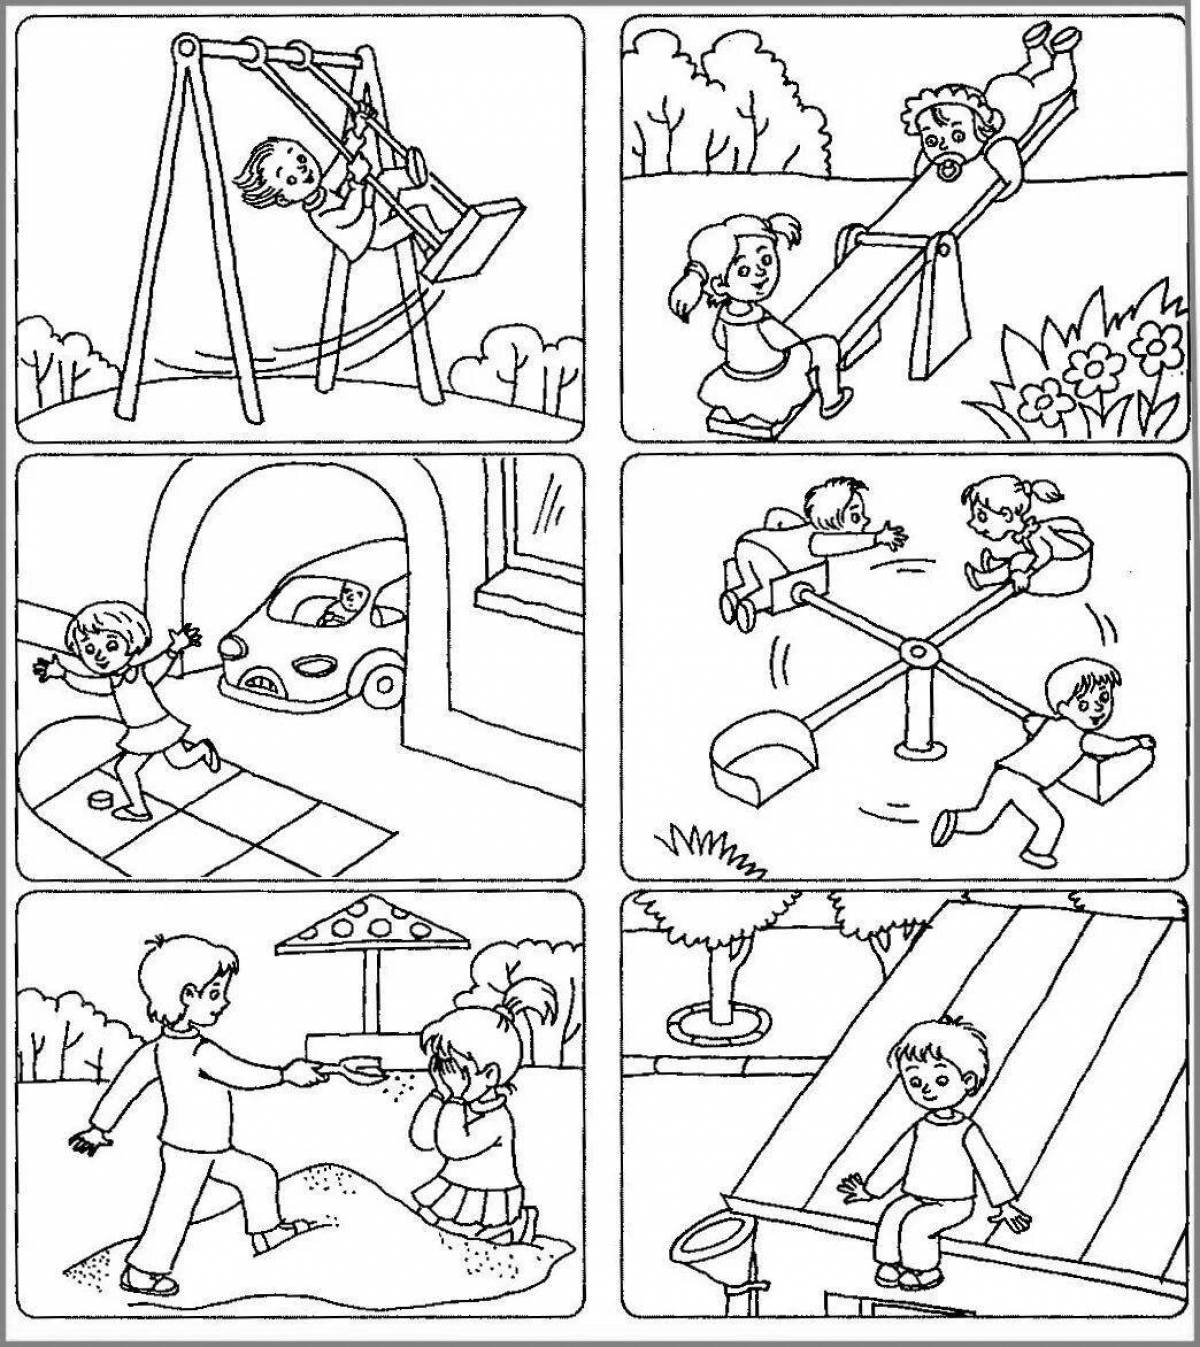 Colorful safety rules coloring page